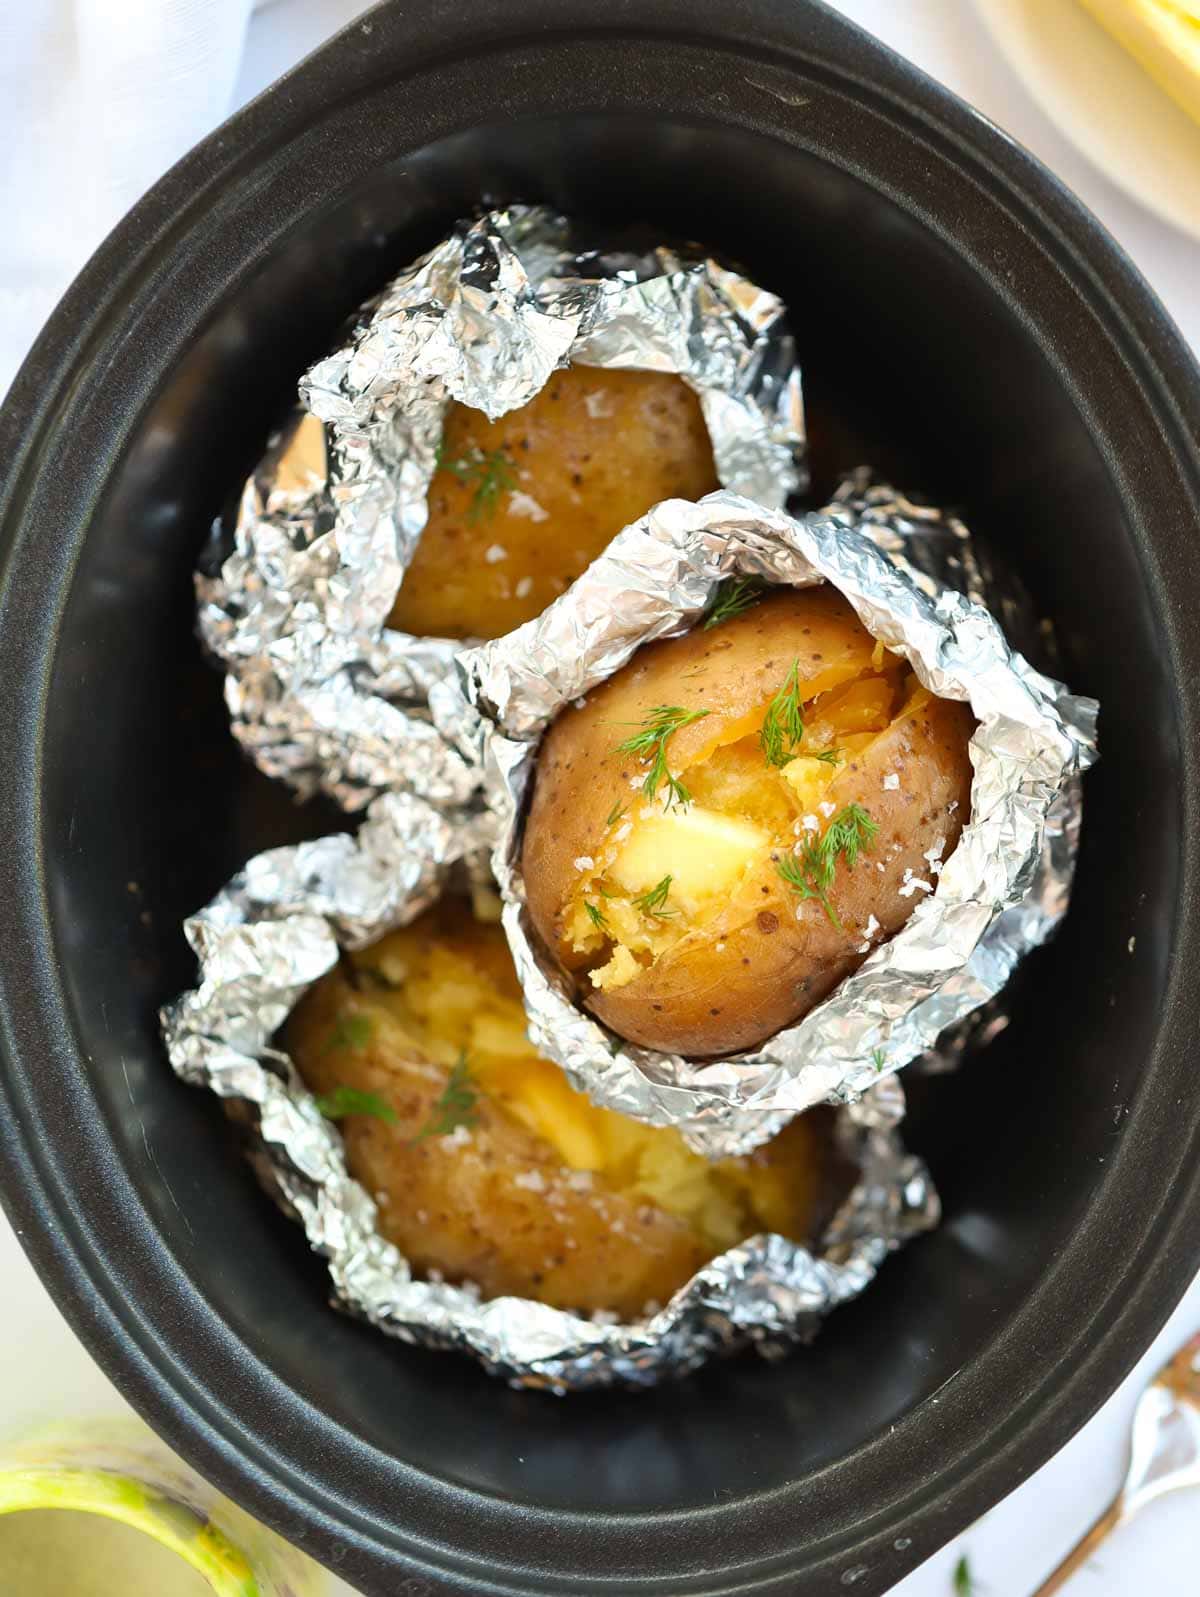 Convenient and delicious recipe for slow cooker jacket potatoes